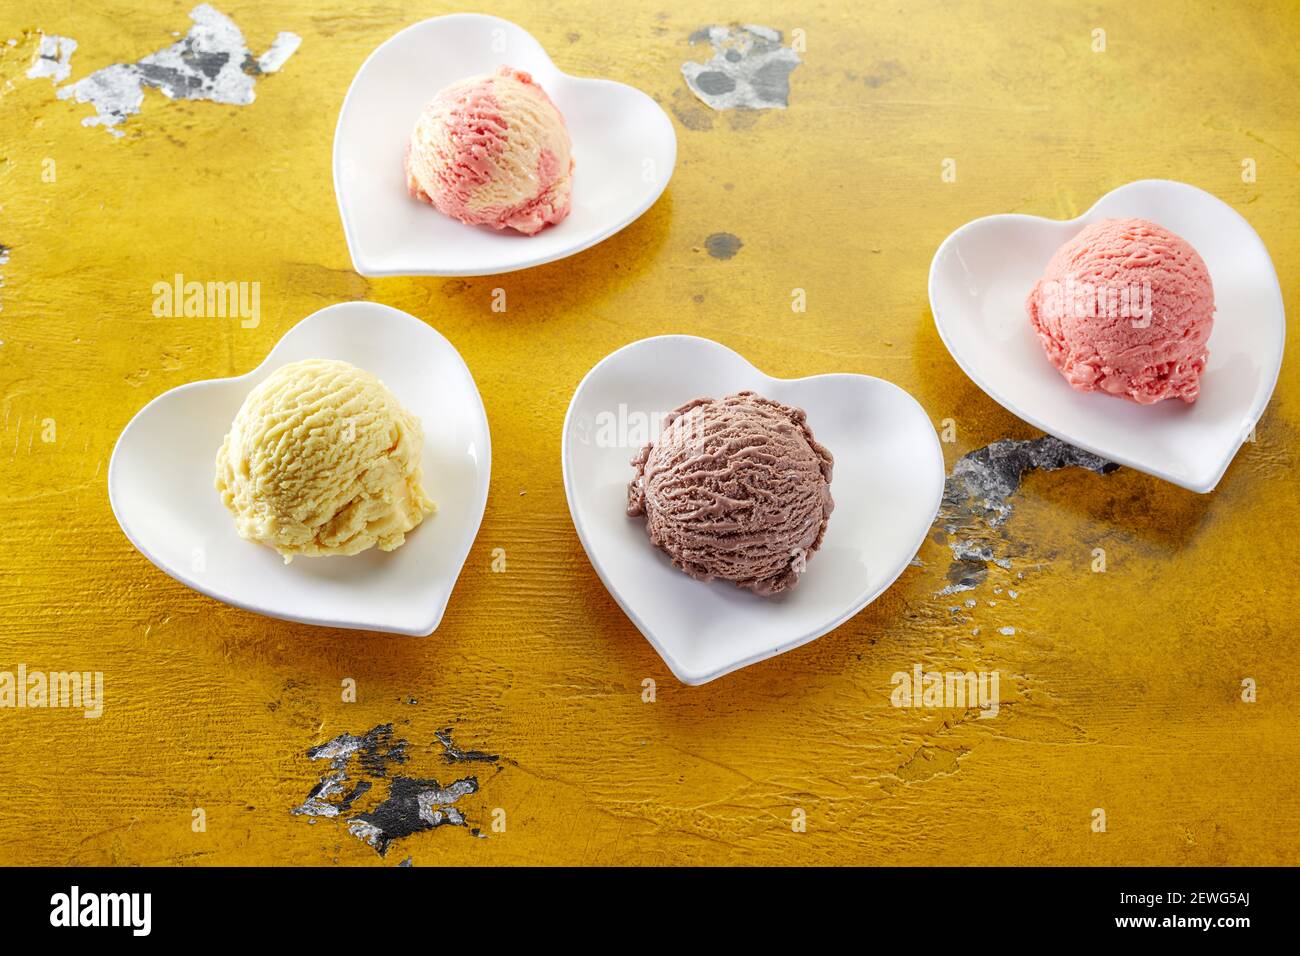 High angle of various ice cream scoops with creamy texture on heart shaped ceramic plates on damaged table Stock Photo